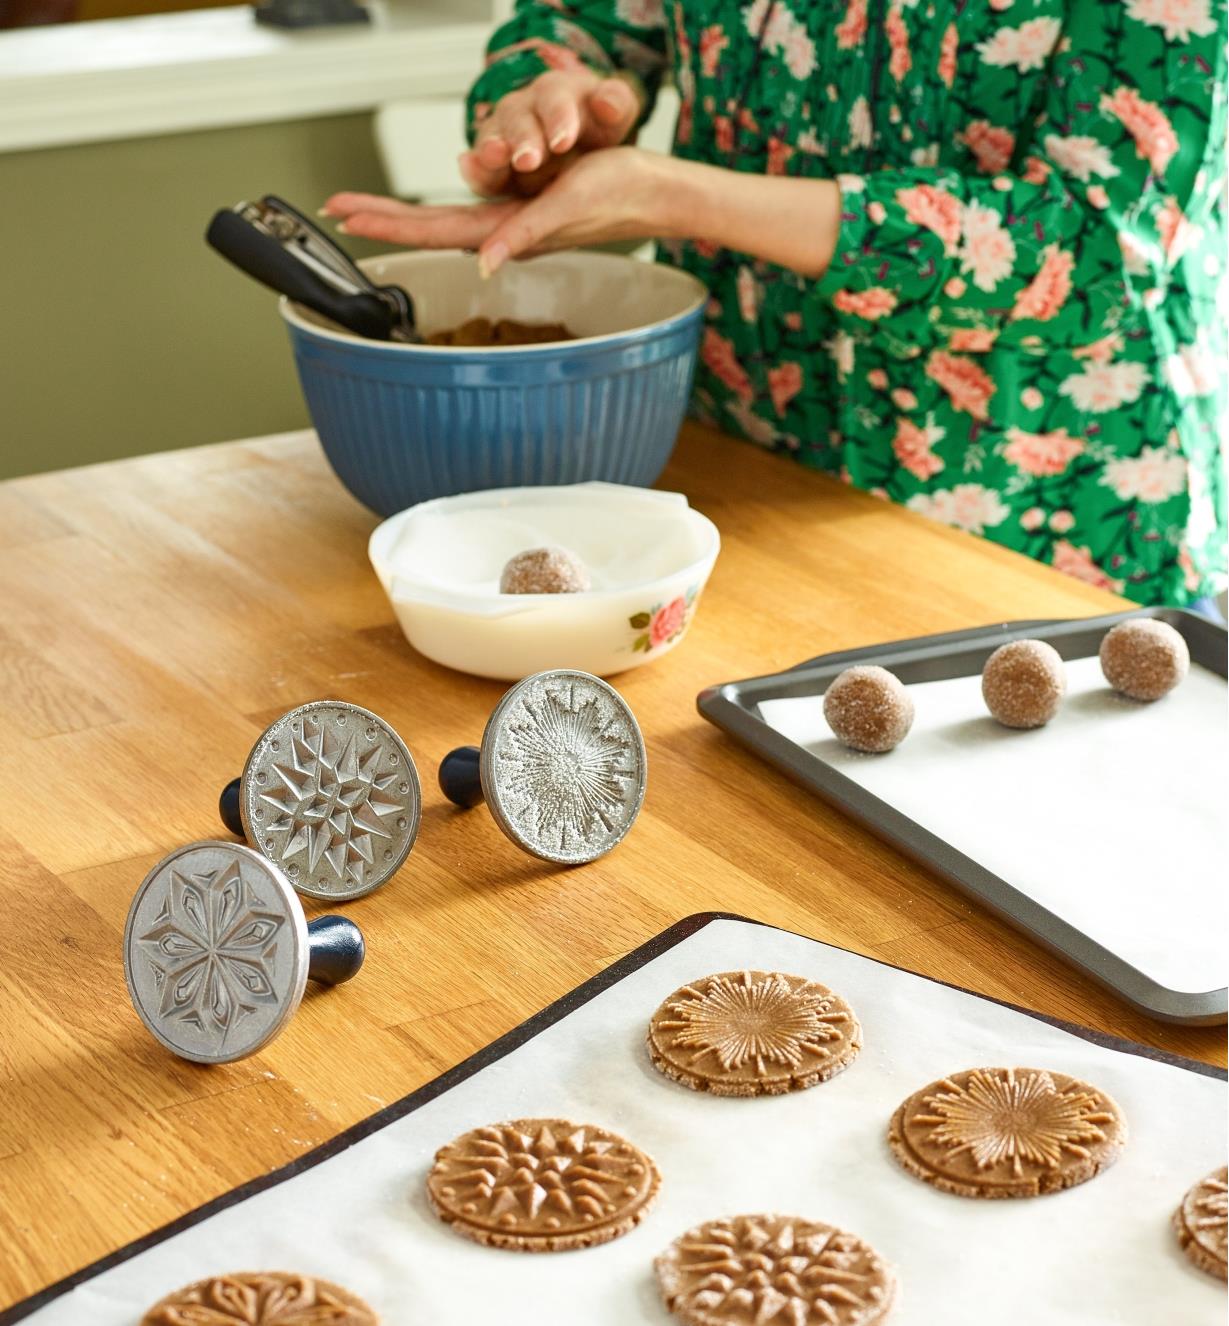 Three cookie stamps sitting next to a tray of cookies that have been stamped, while a woman in the background rolls more cookie dough